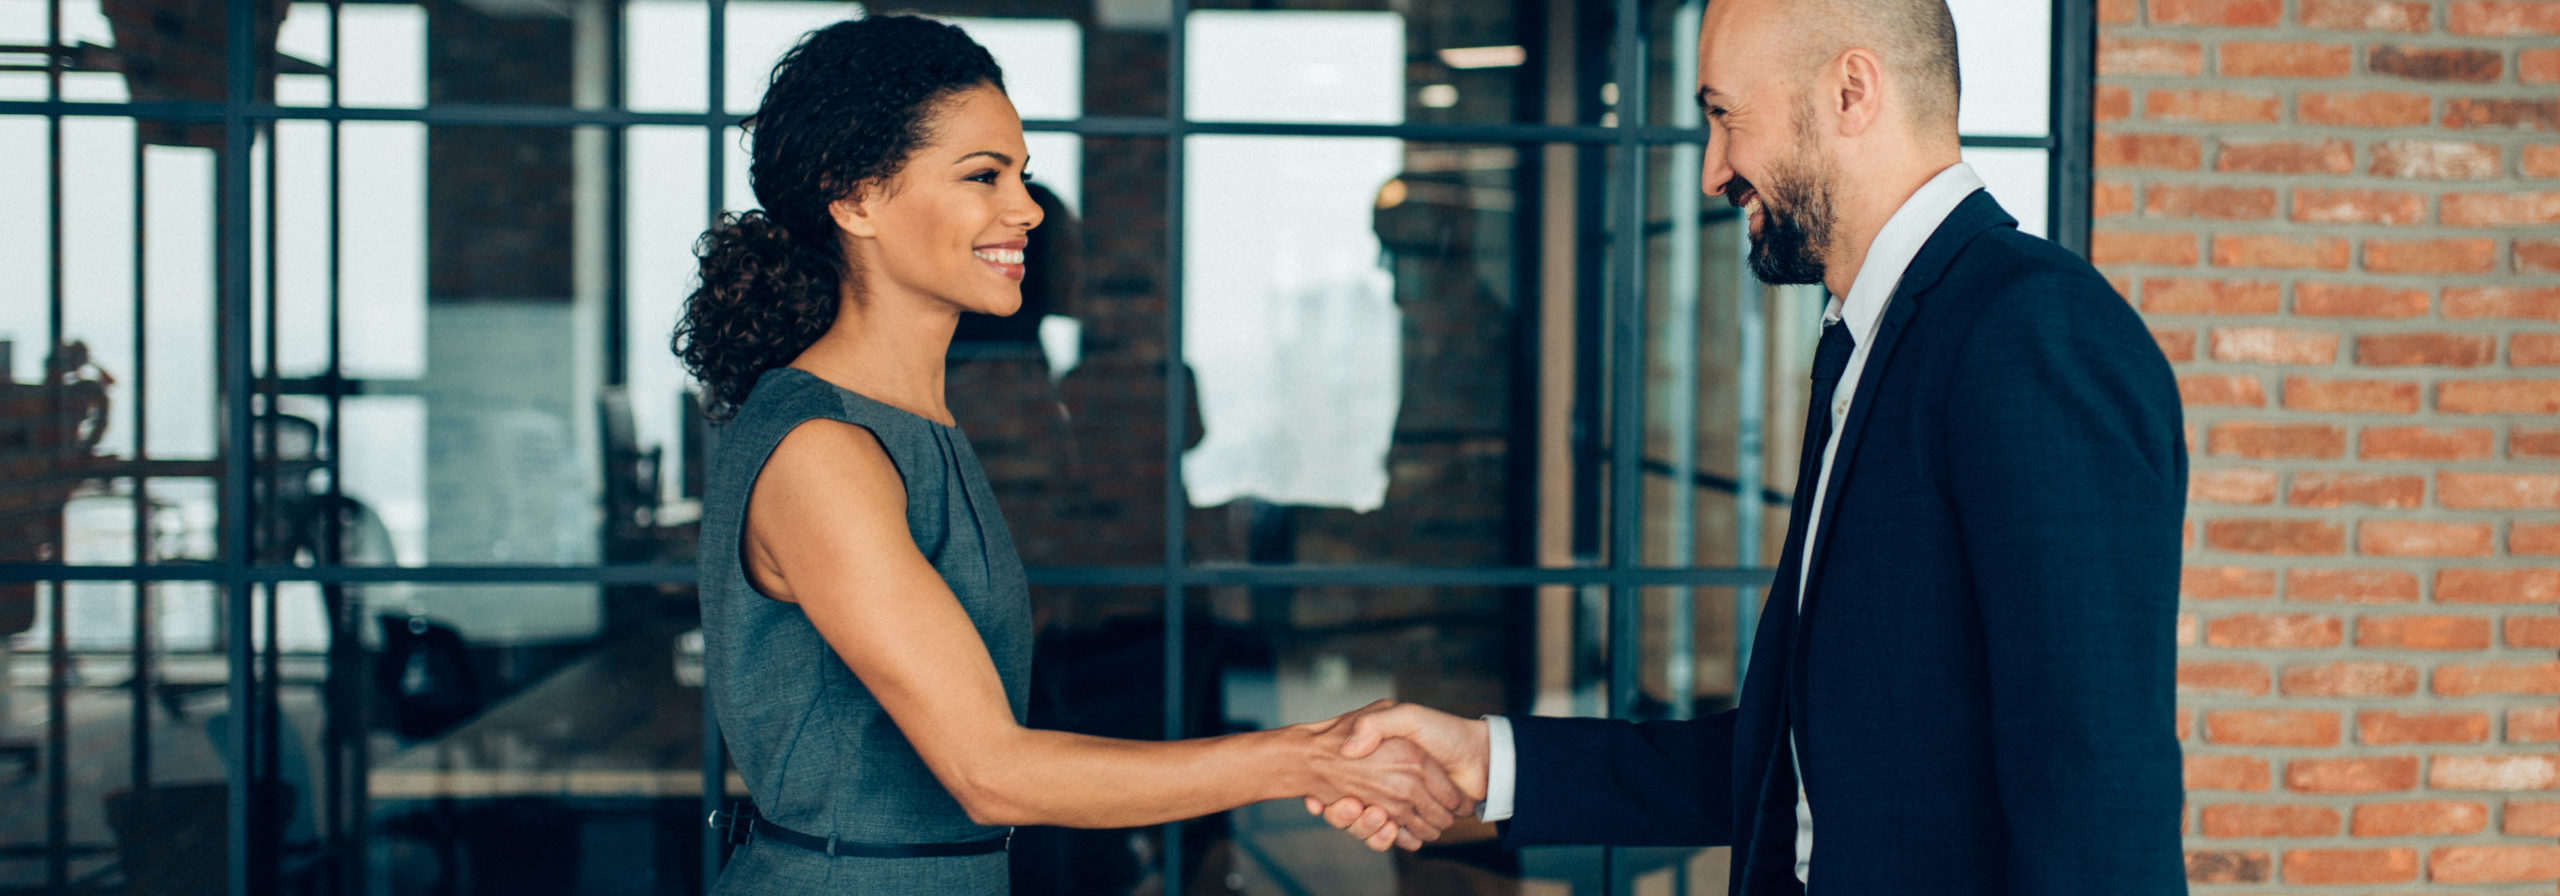 Business people smiling and shaking hands